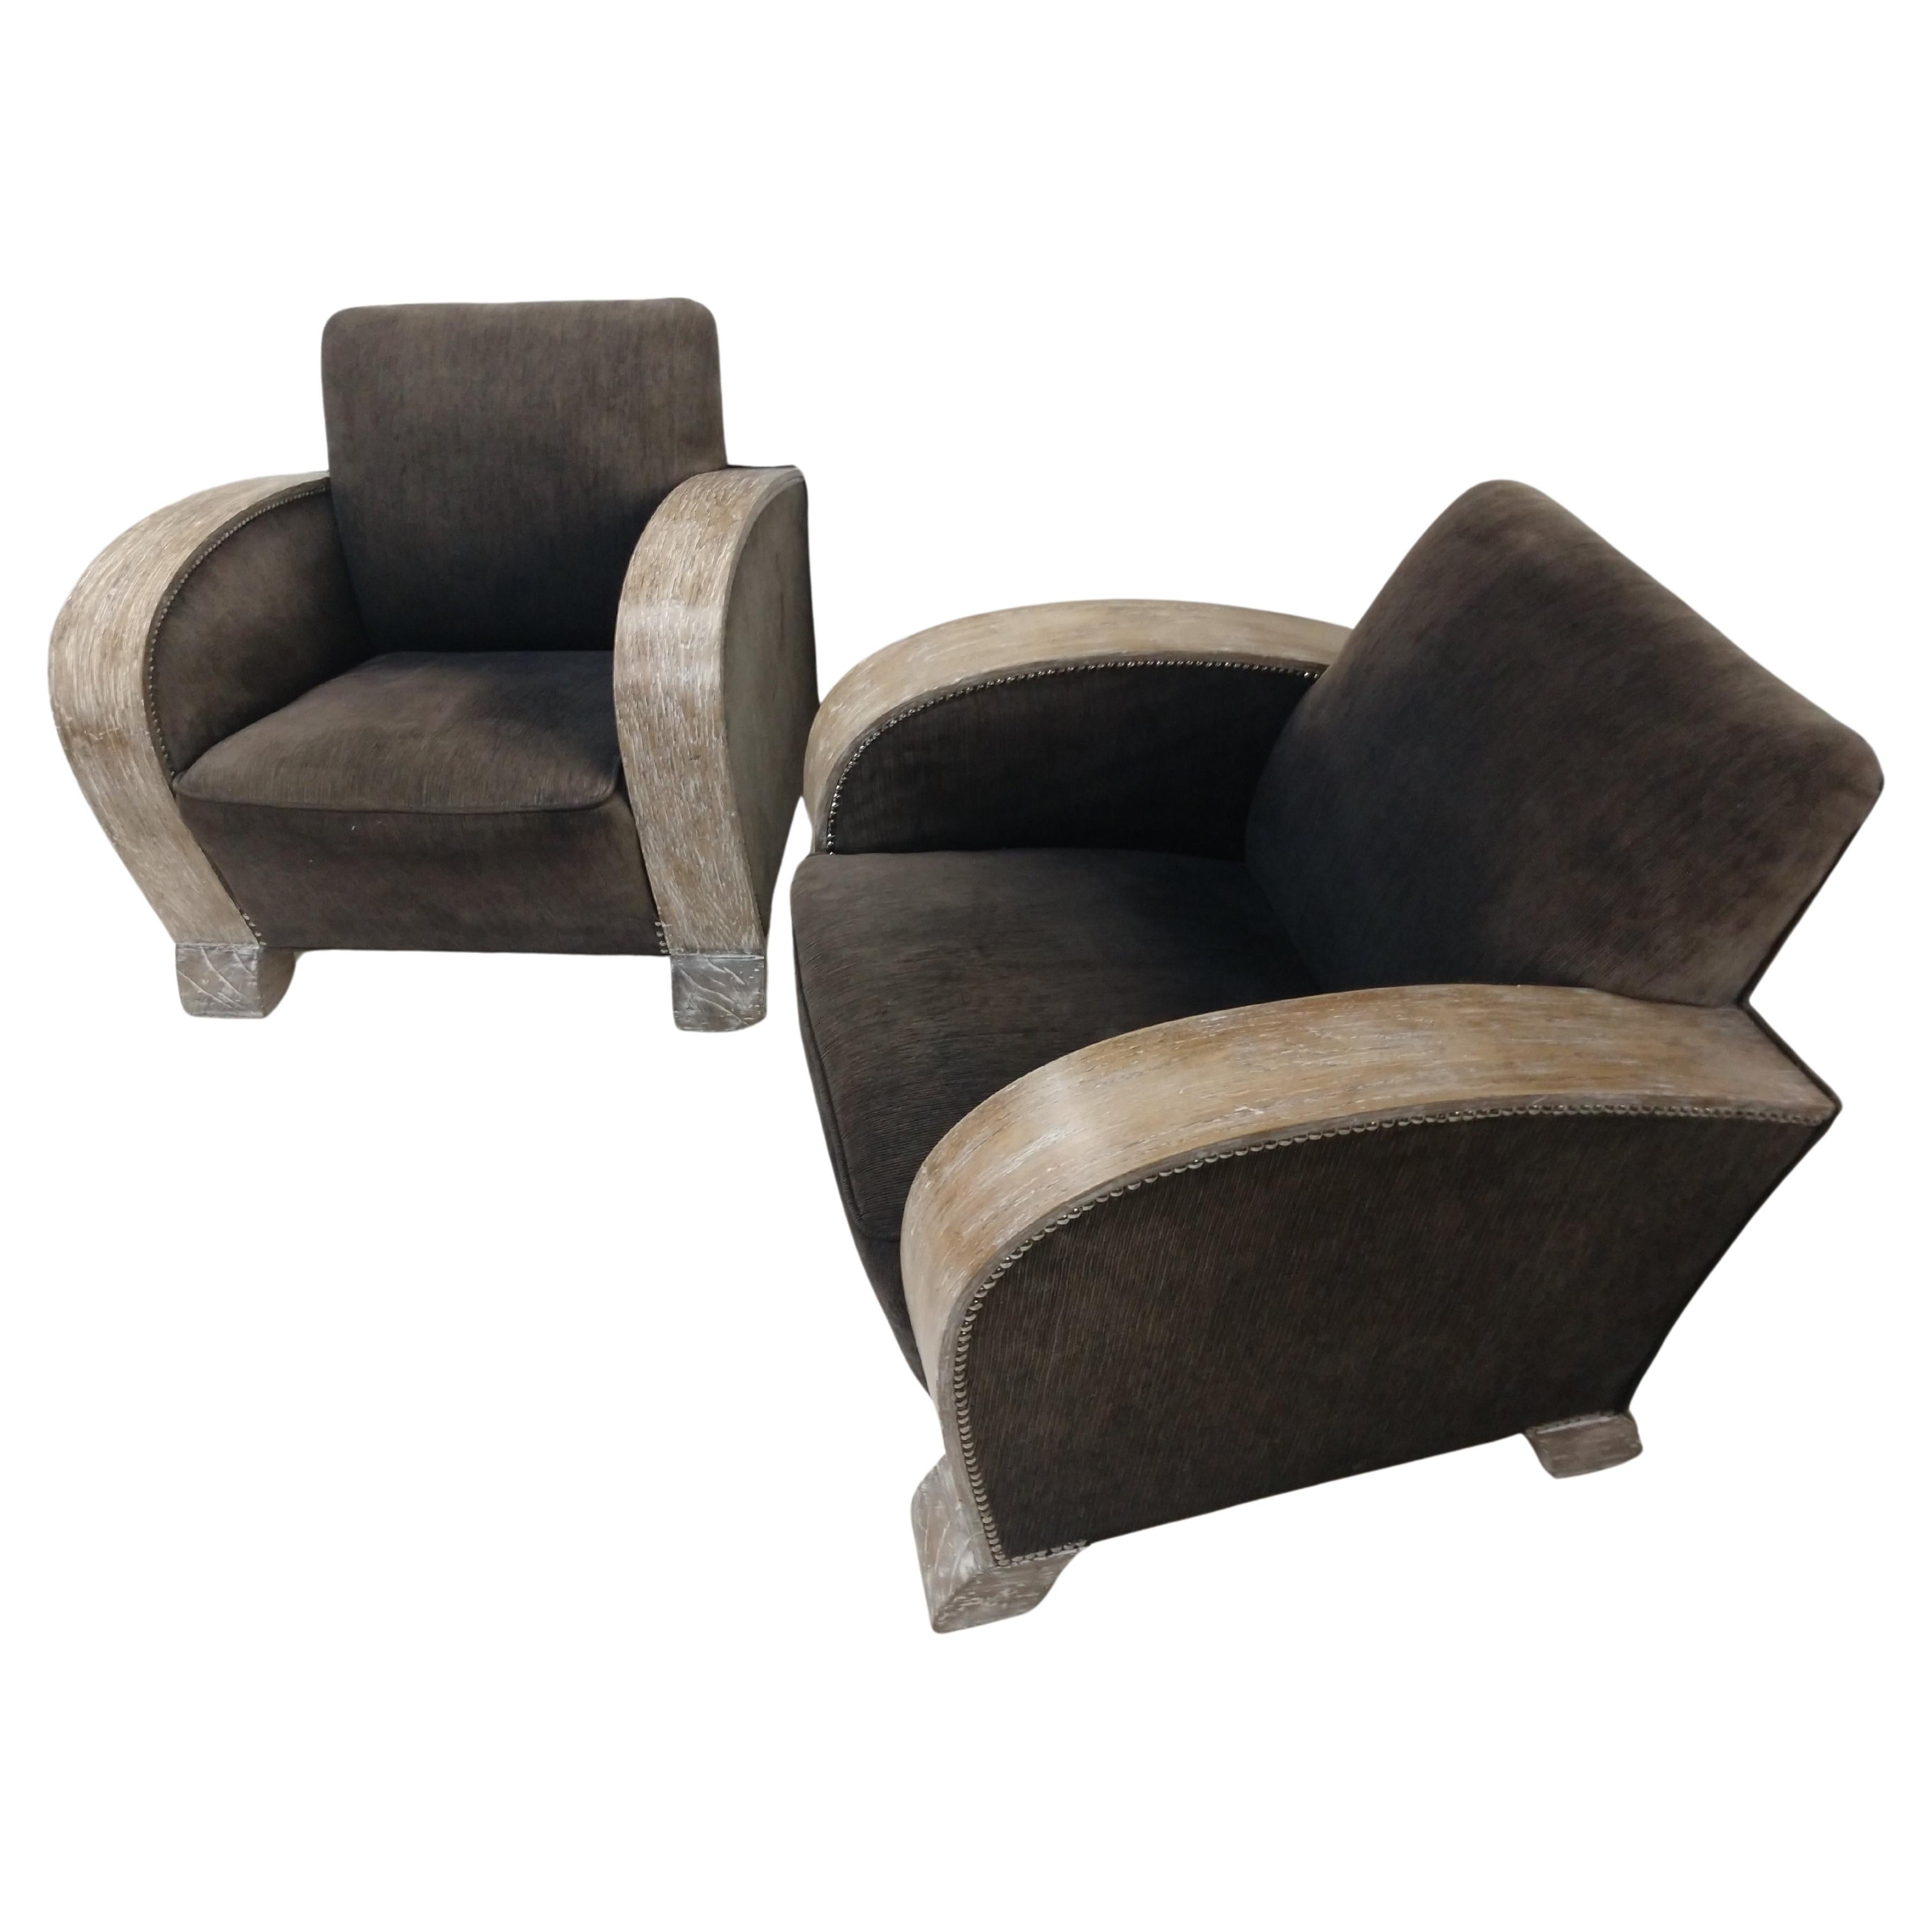 Elegant pair of fabulous Art Deco Club chairs. Brought back from Argentina this pair is in fabulous condition. Corded fabric has mellowed to a charcoal grey. Some fading has occurred, but the frames and springs are in amazing condition. Wide oak